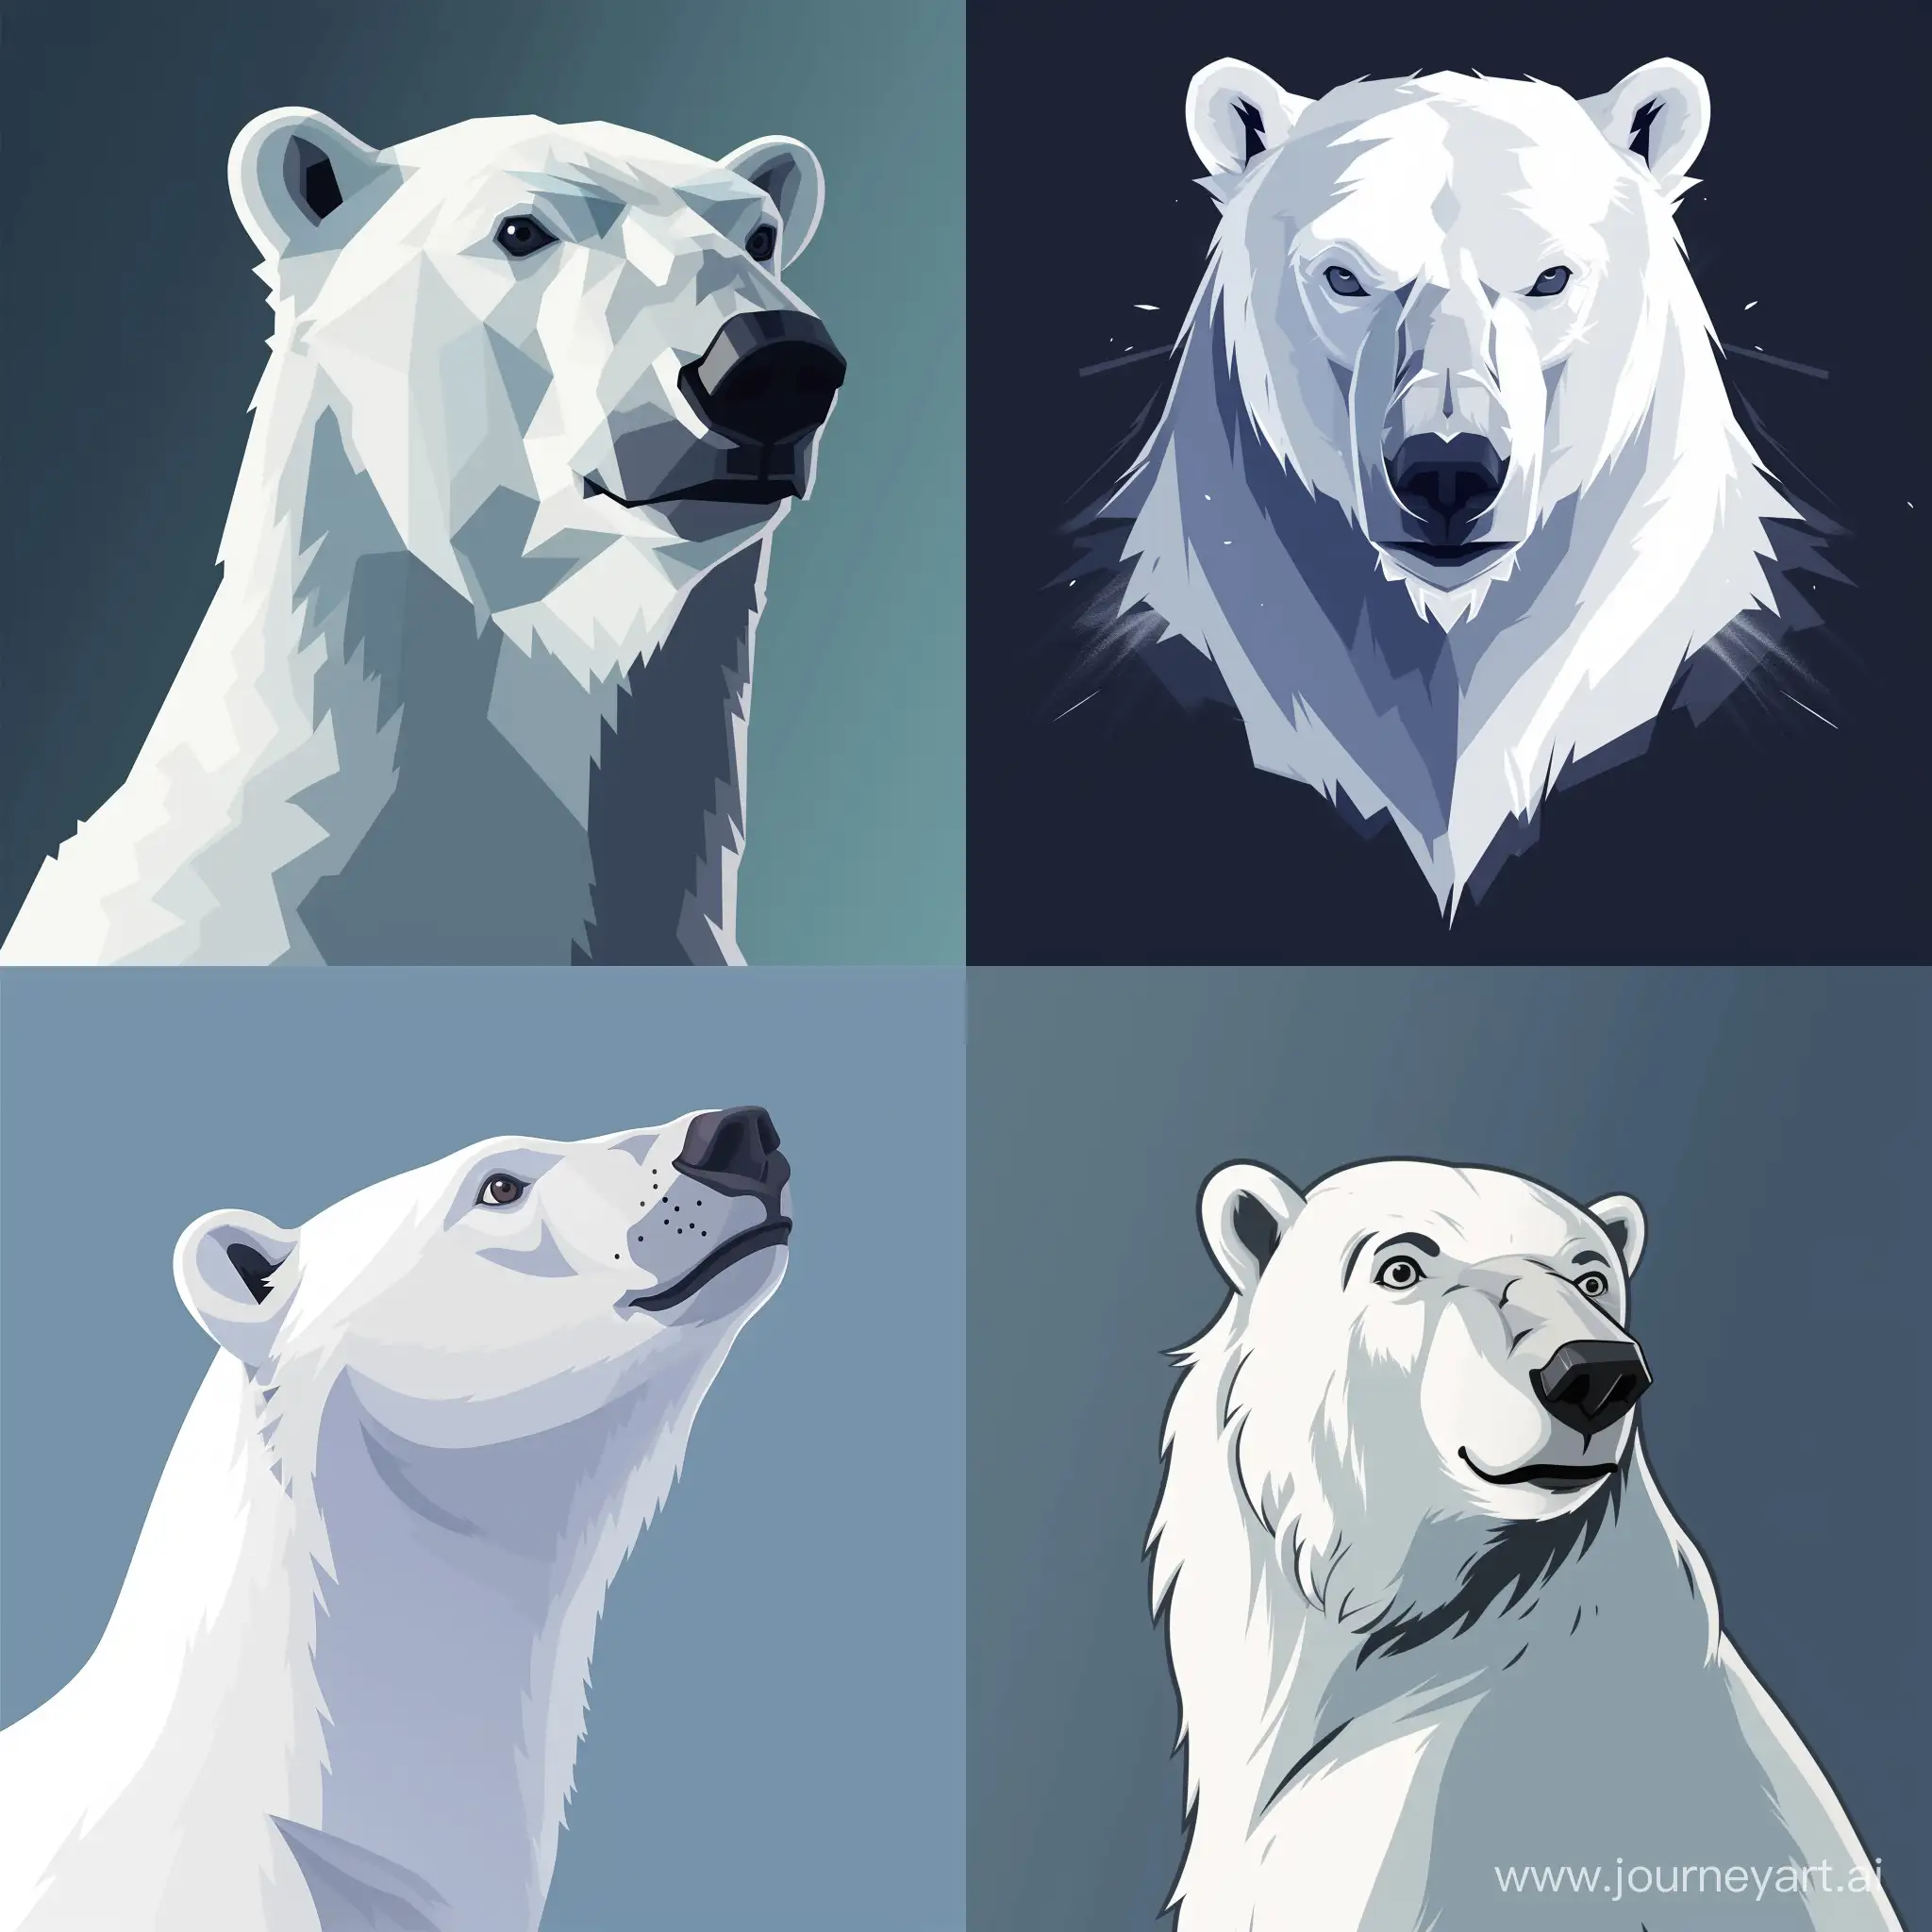 Majestic-and-Stylish-Polar-Bear-Avatar-for-Memorable-Impressions